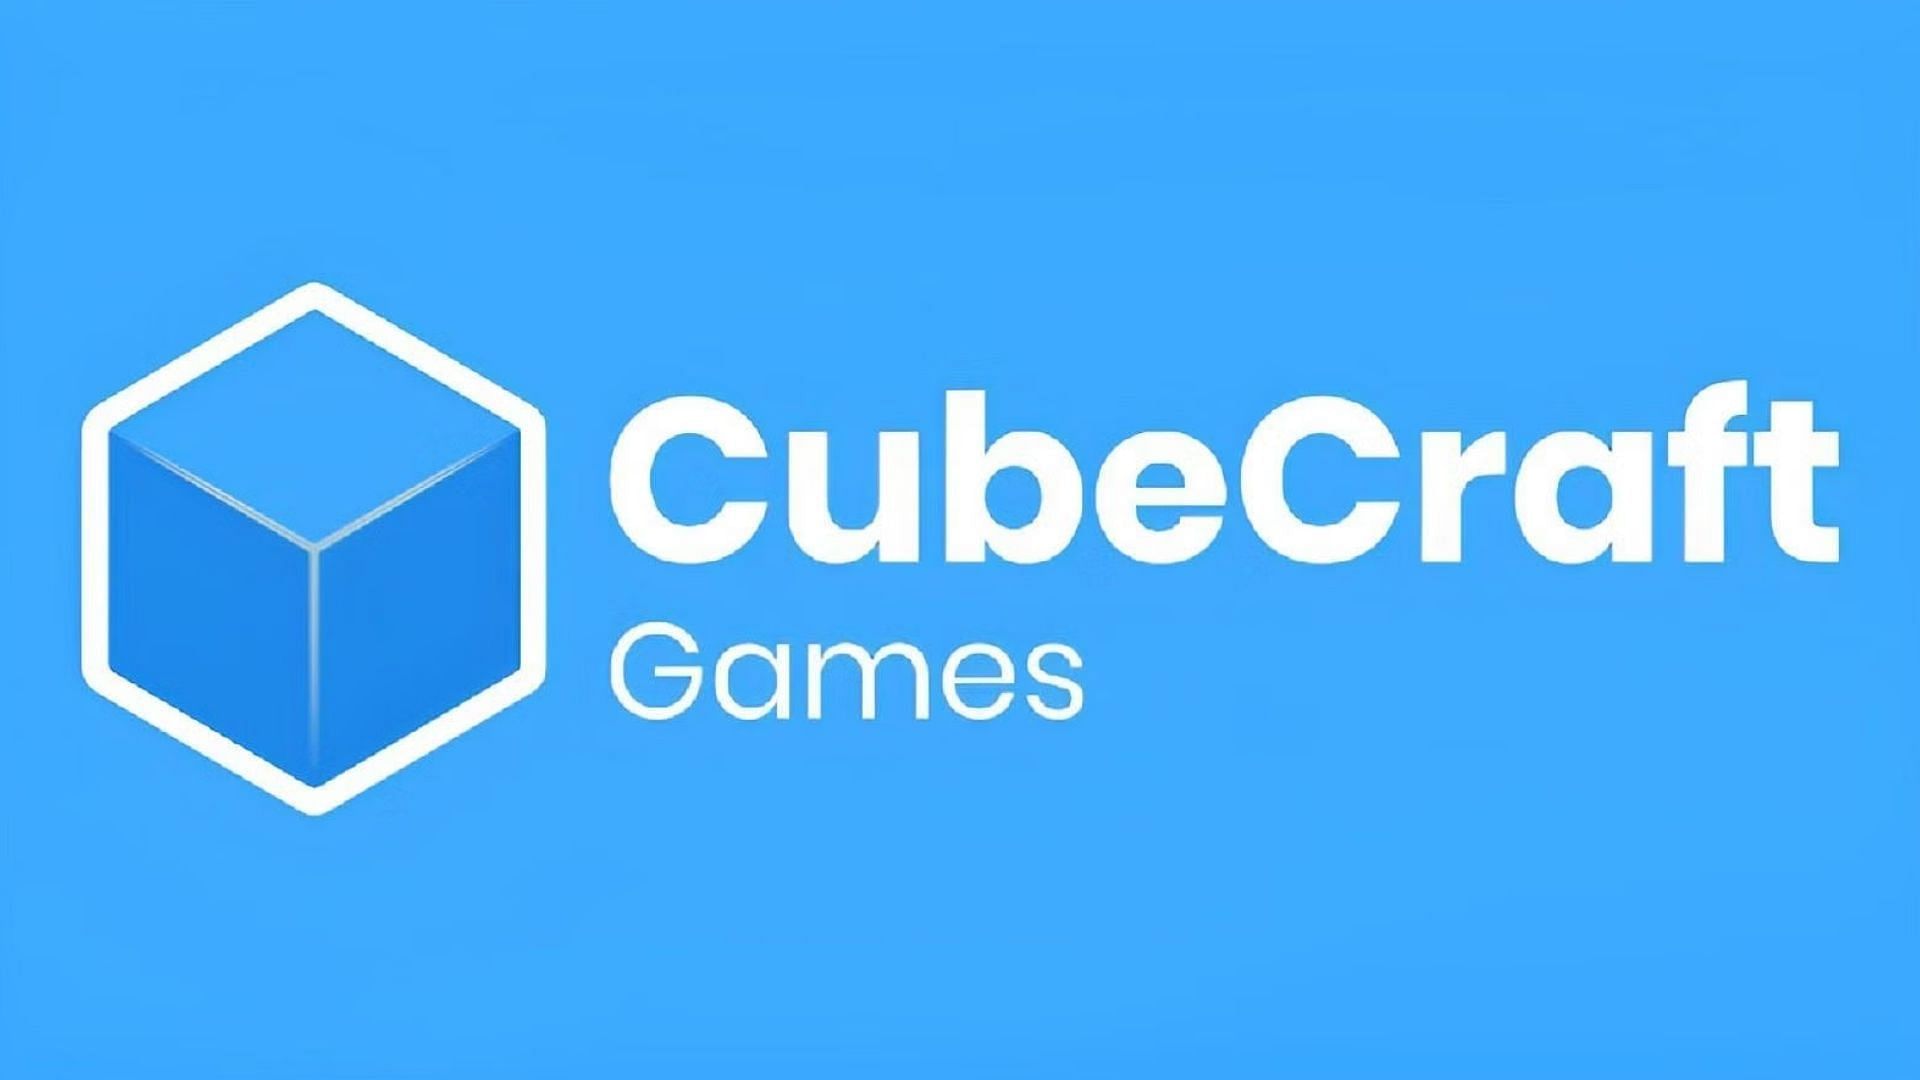 CubeCraft has a thriving player community and plenty of game modes to enjoy (Image via CubeCraft Games)